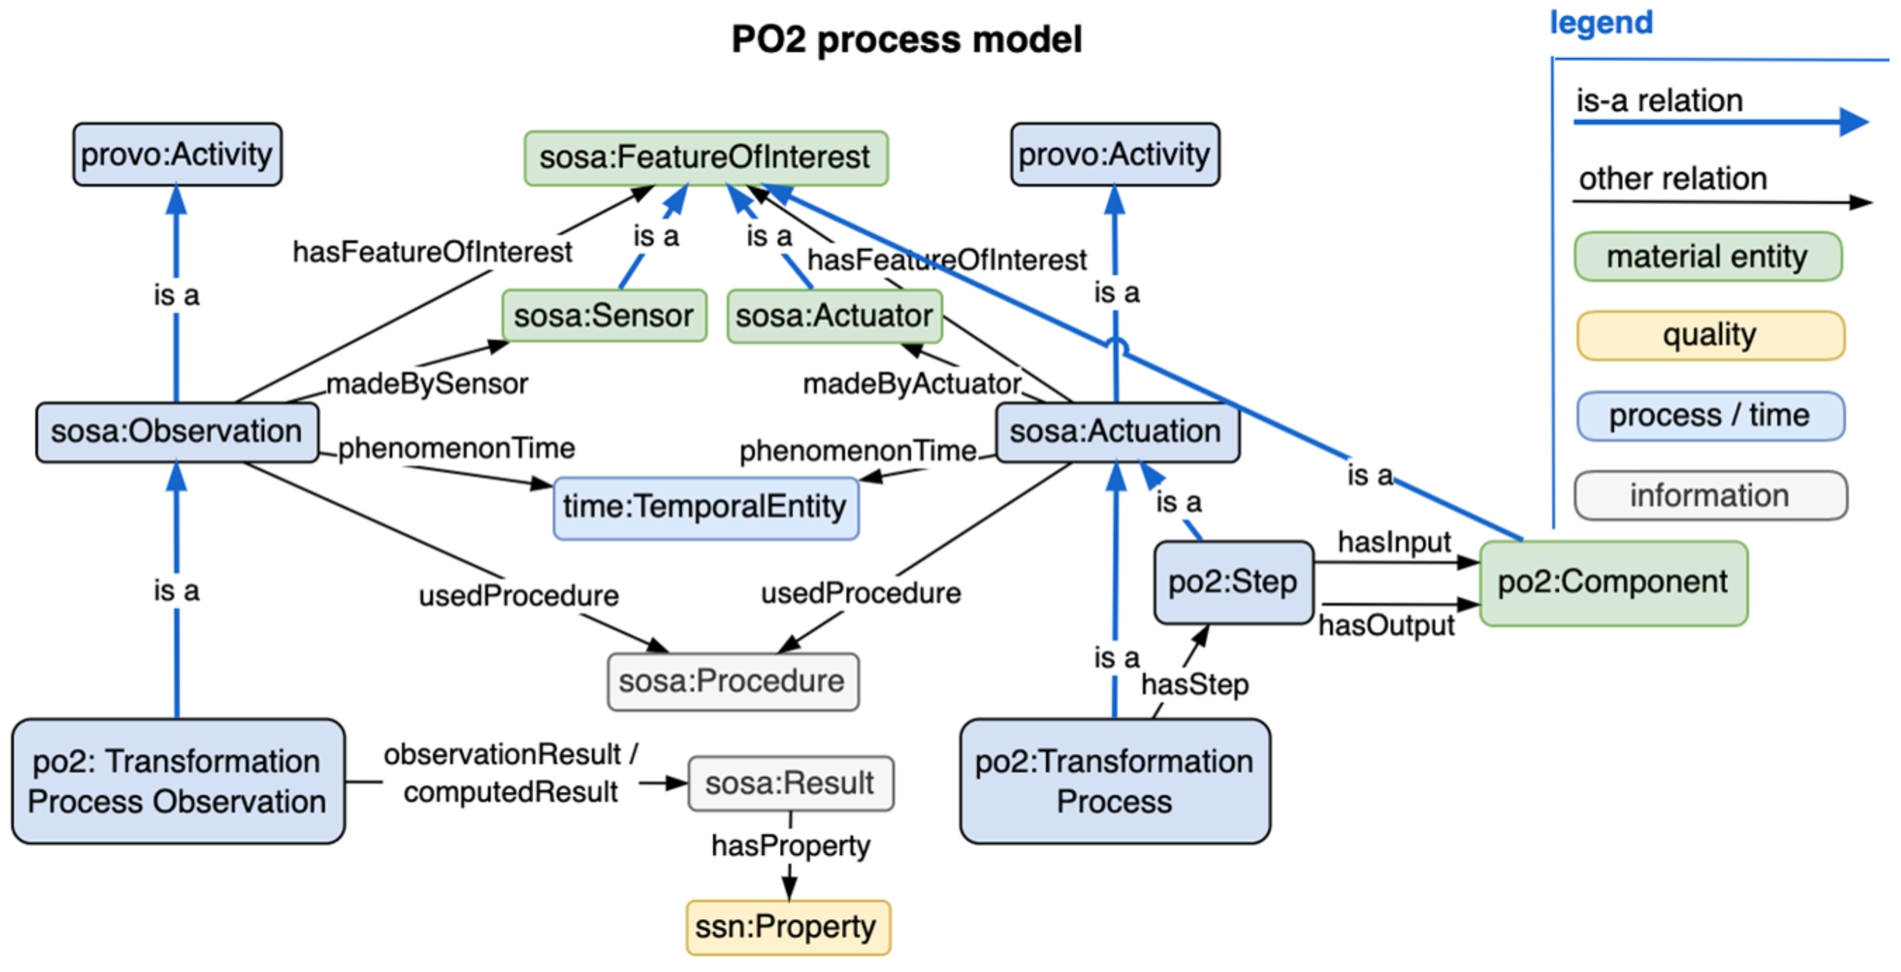 PO2 uses similar classes for both production line actuation and observation.